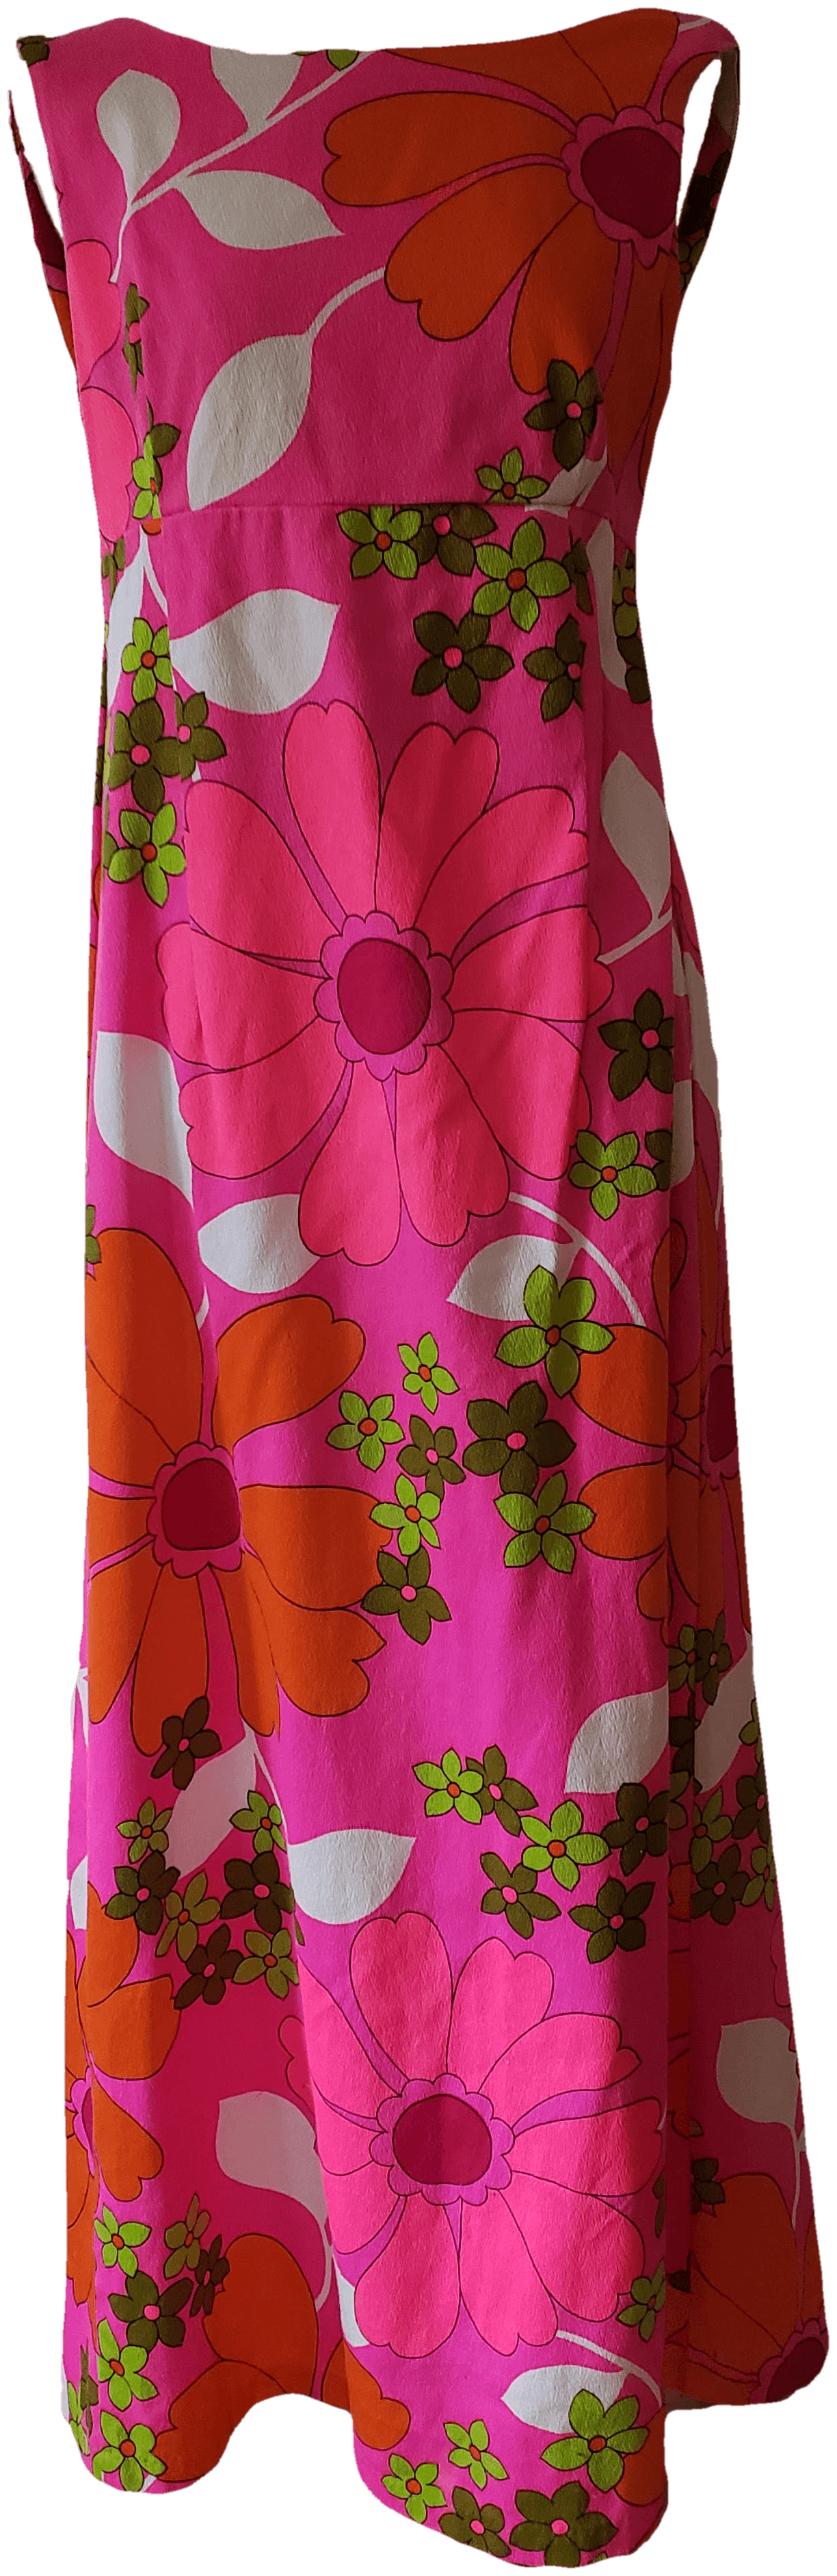 Vintage Bright Floral Empire Waist Maxi Dress By Aloha Authentic Shop Thrilling 